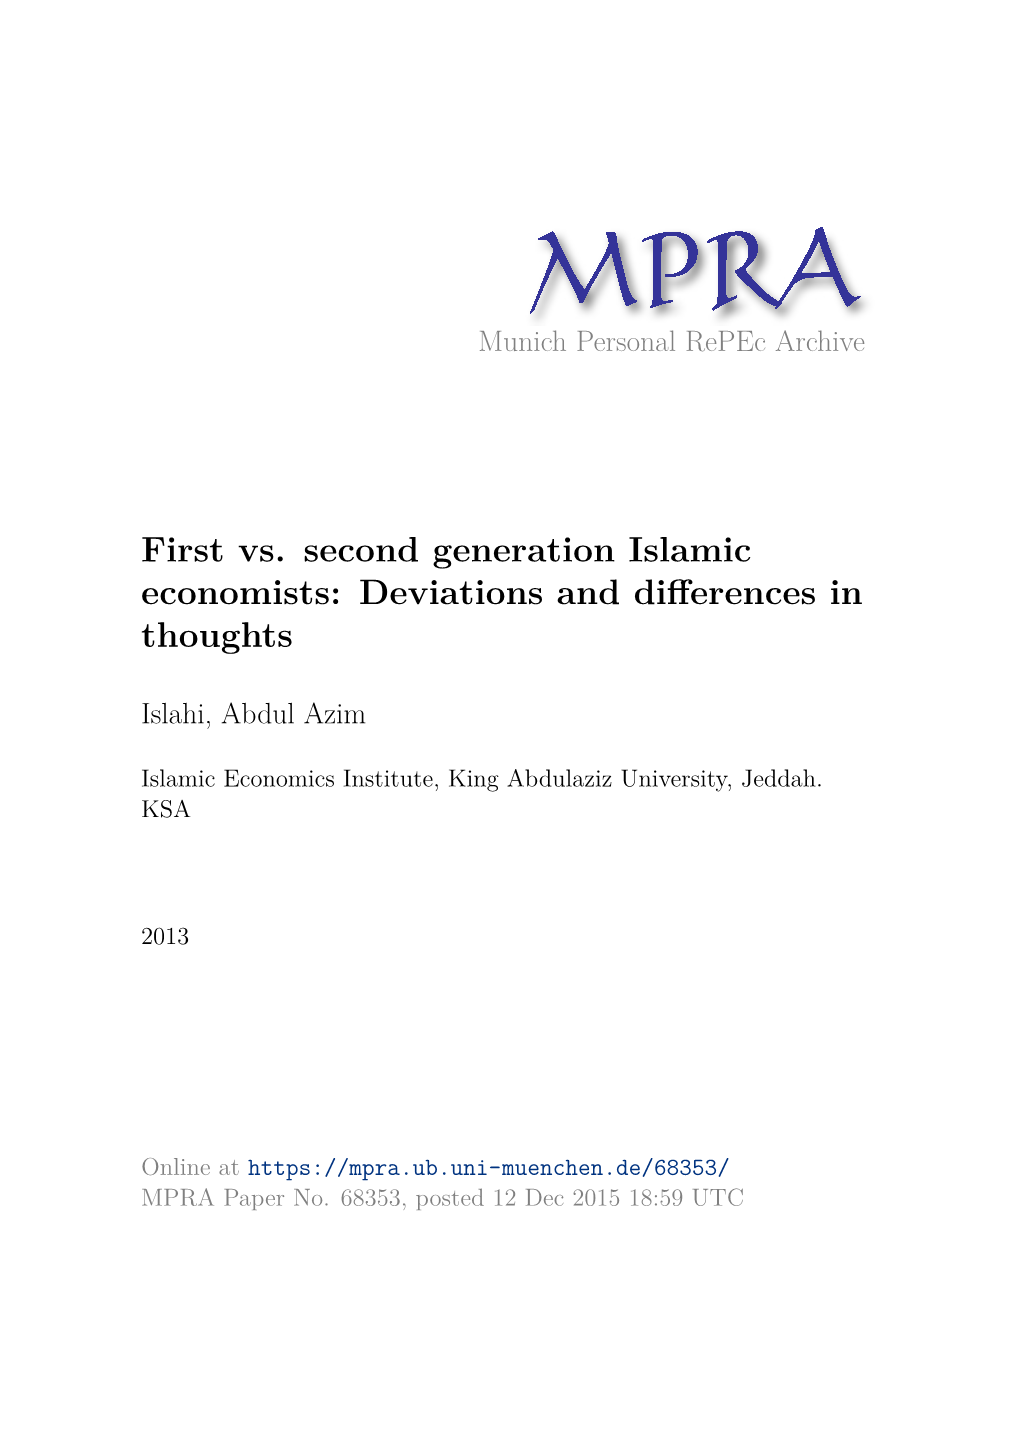 First Vs. Second Generation Islamic Economists: Deviations and Diﬀerences in Thoughts